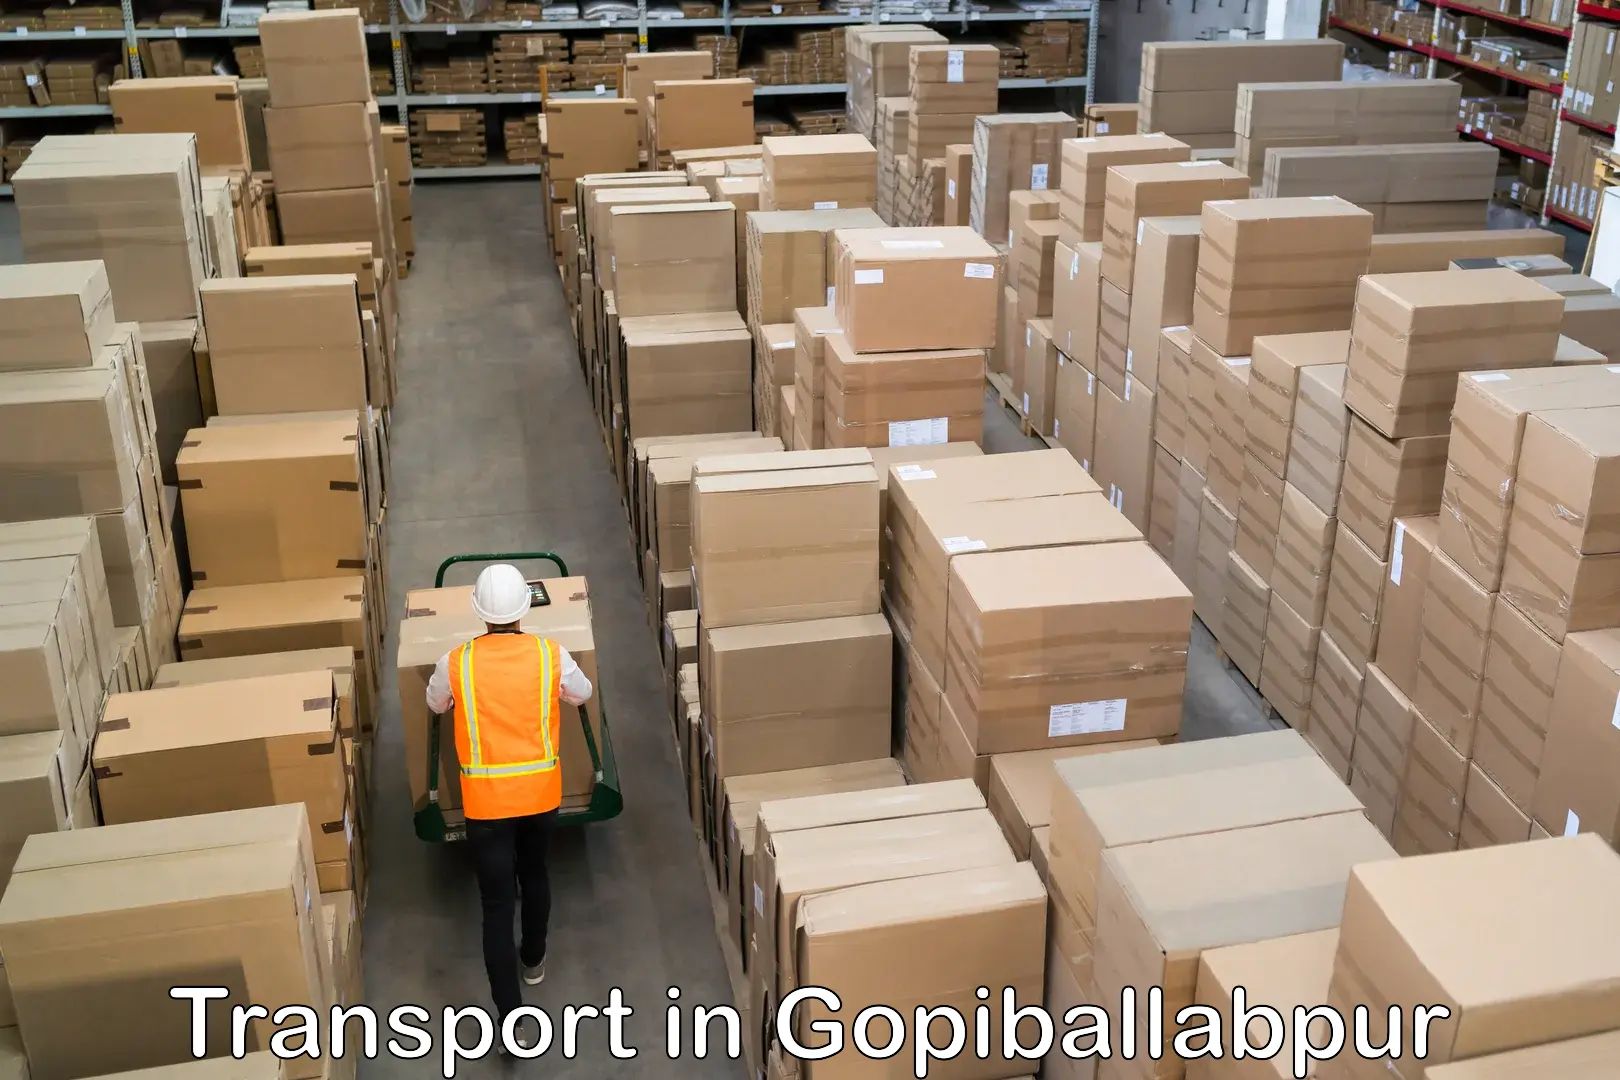 Air freight transport services in Gopiballabpur